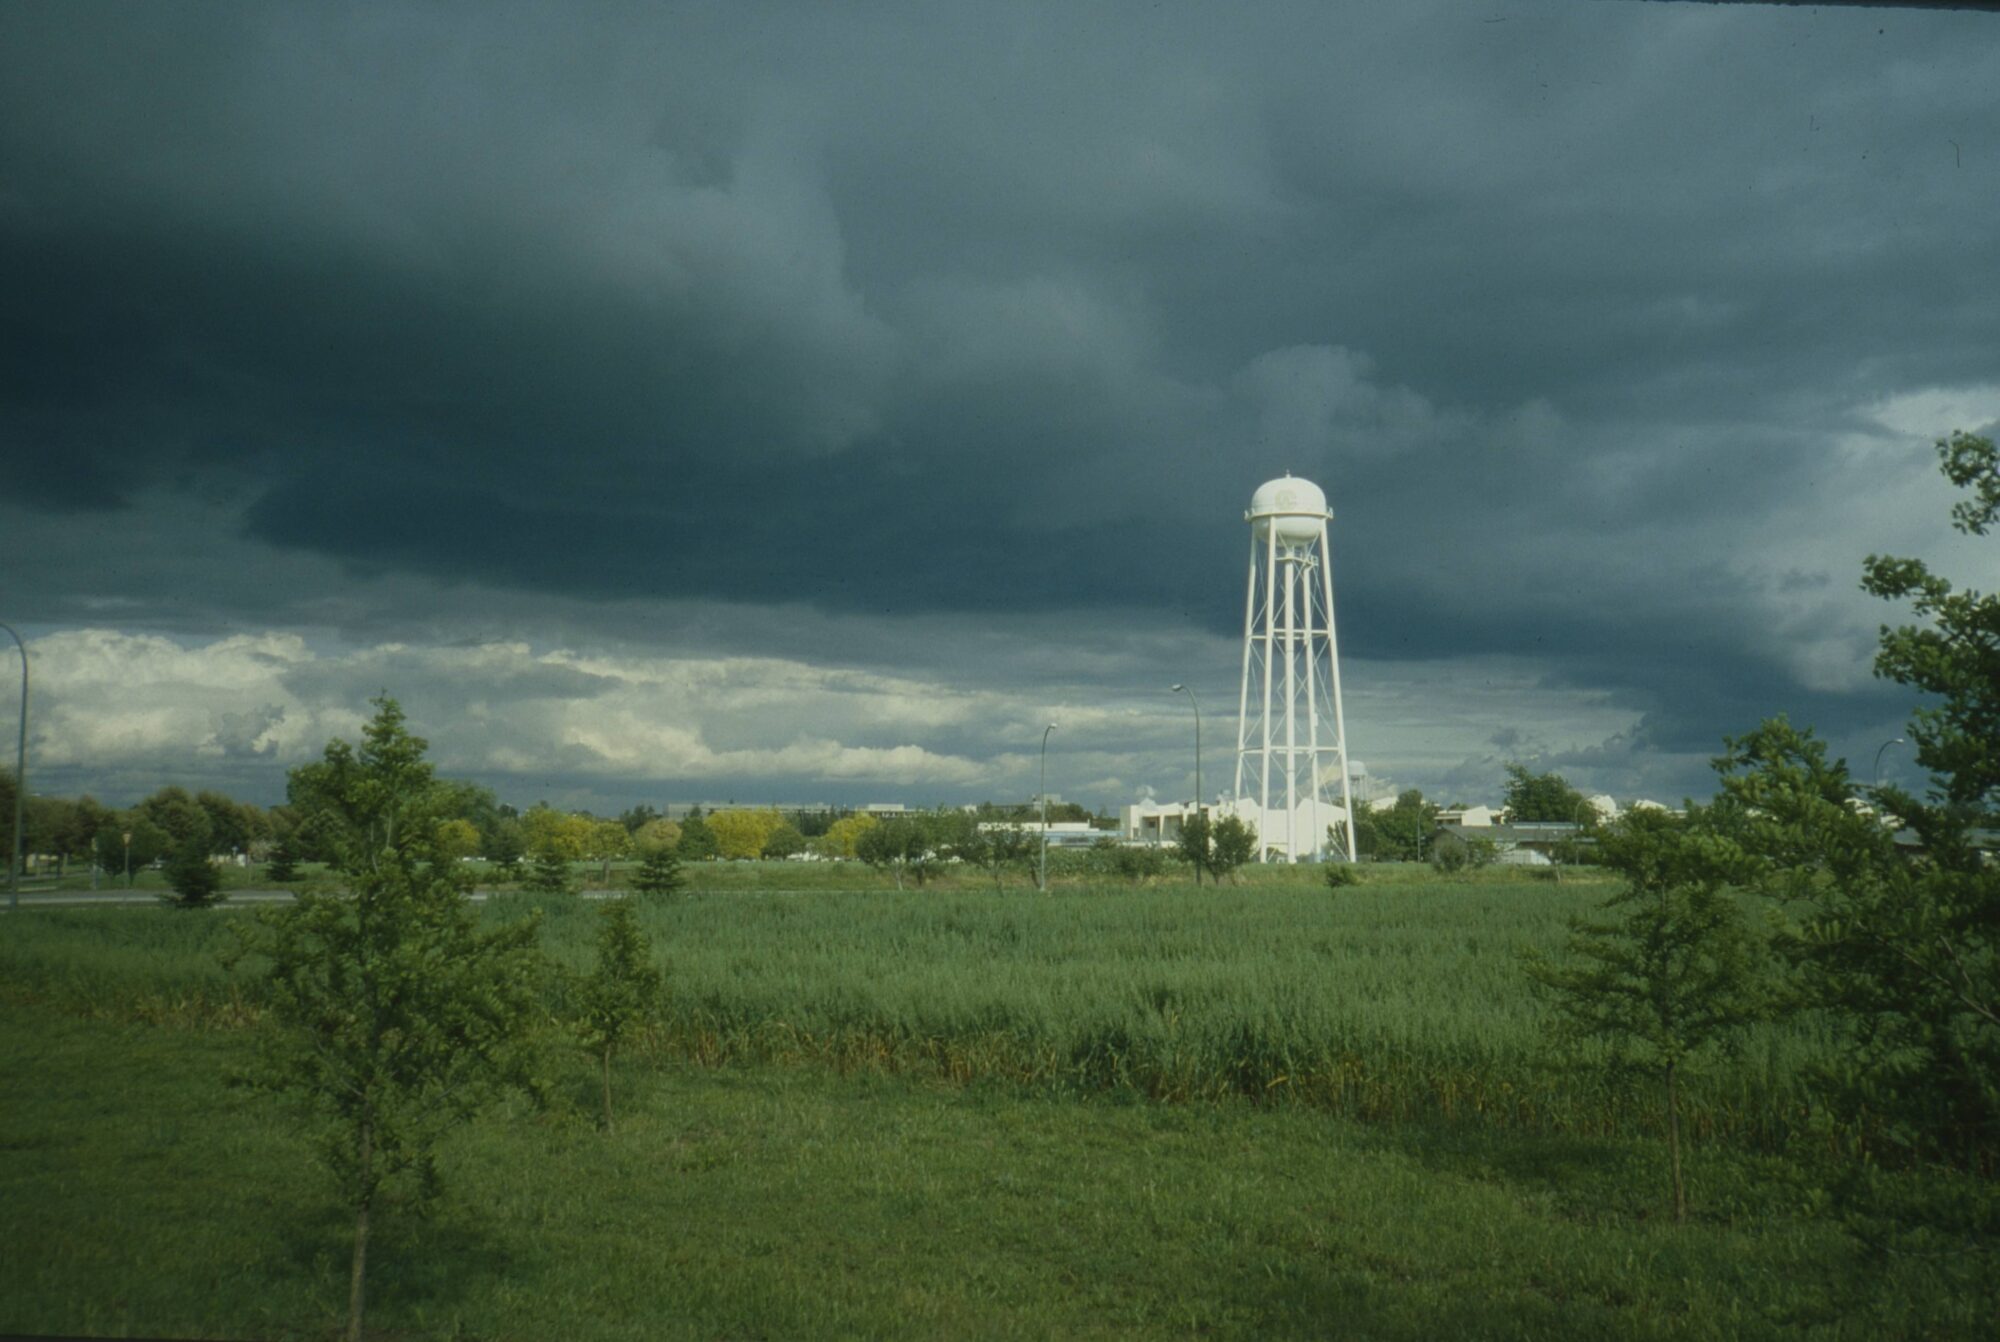 Water tower white against rain clouds